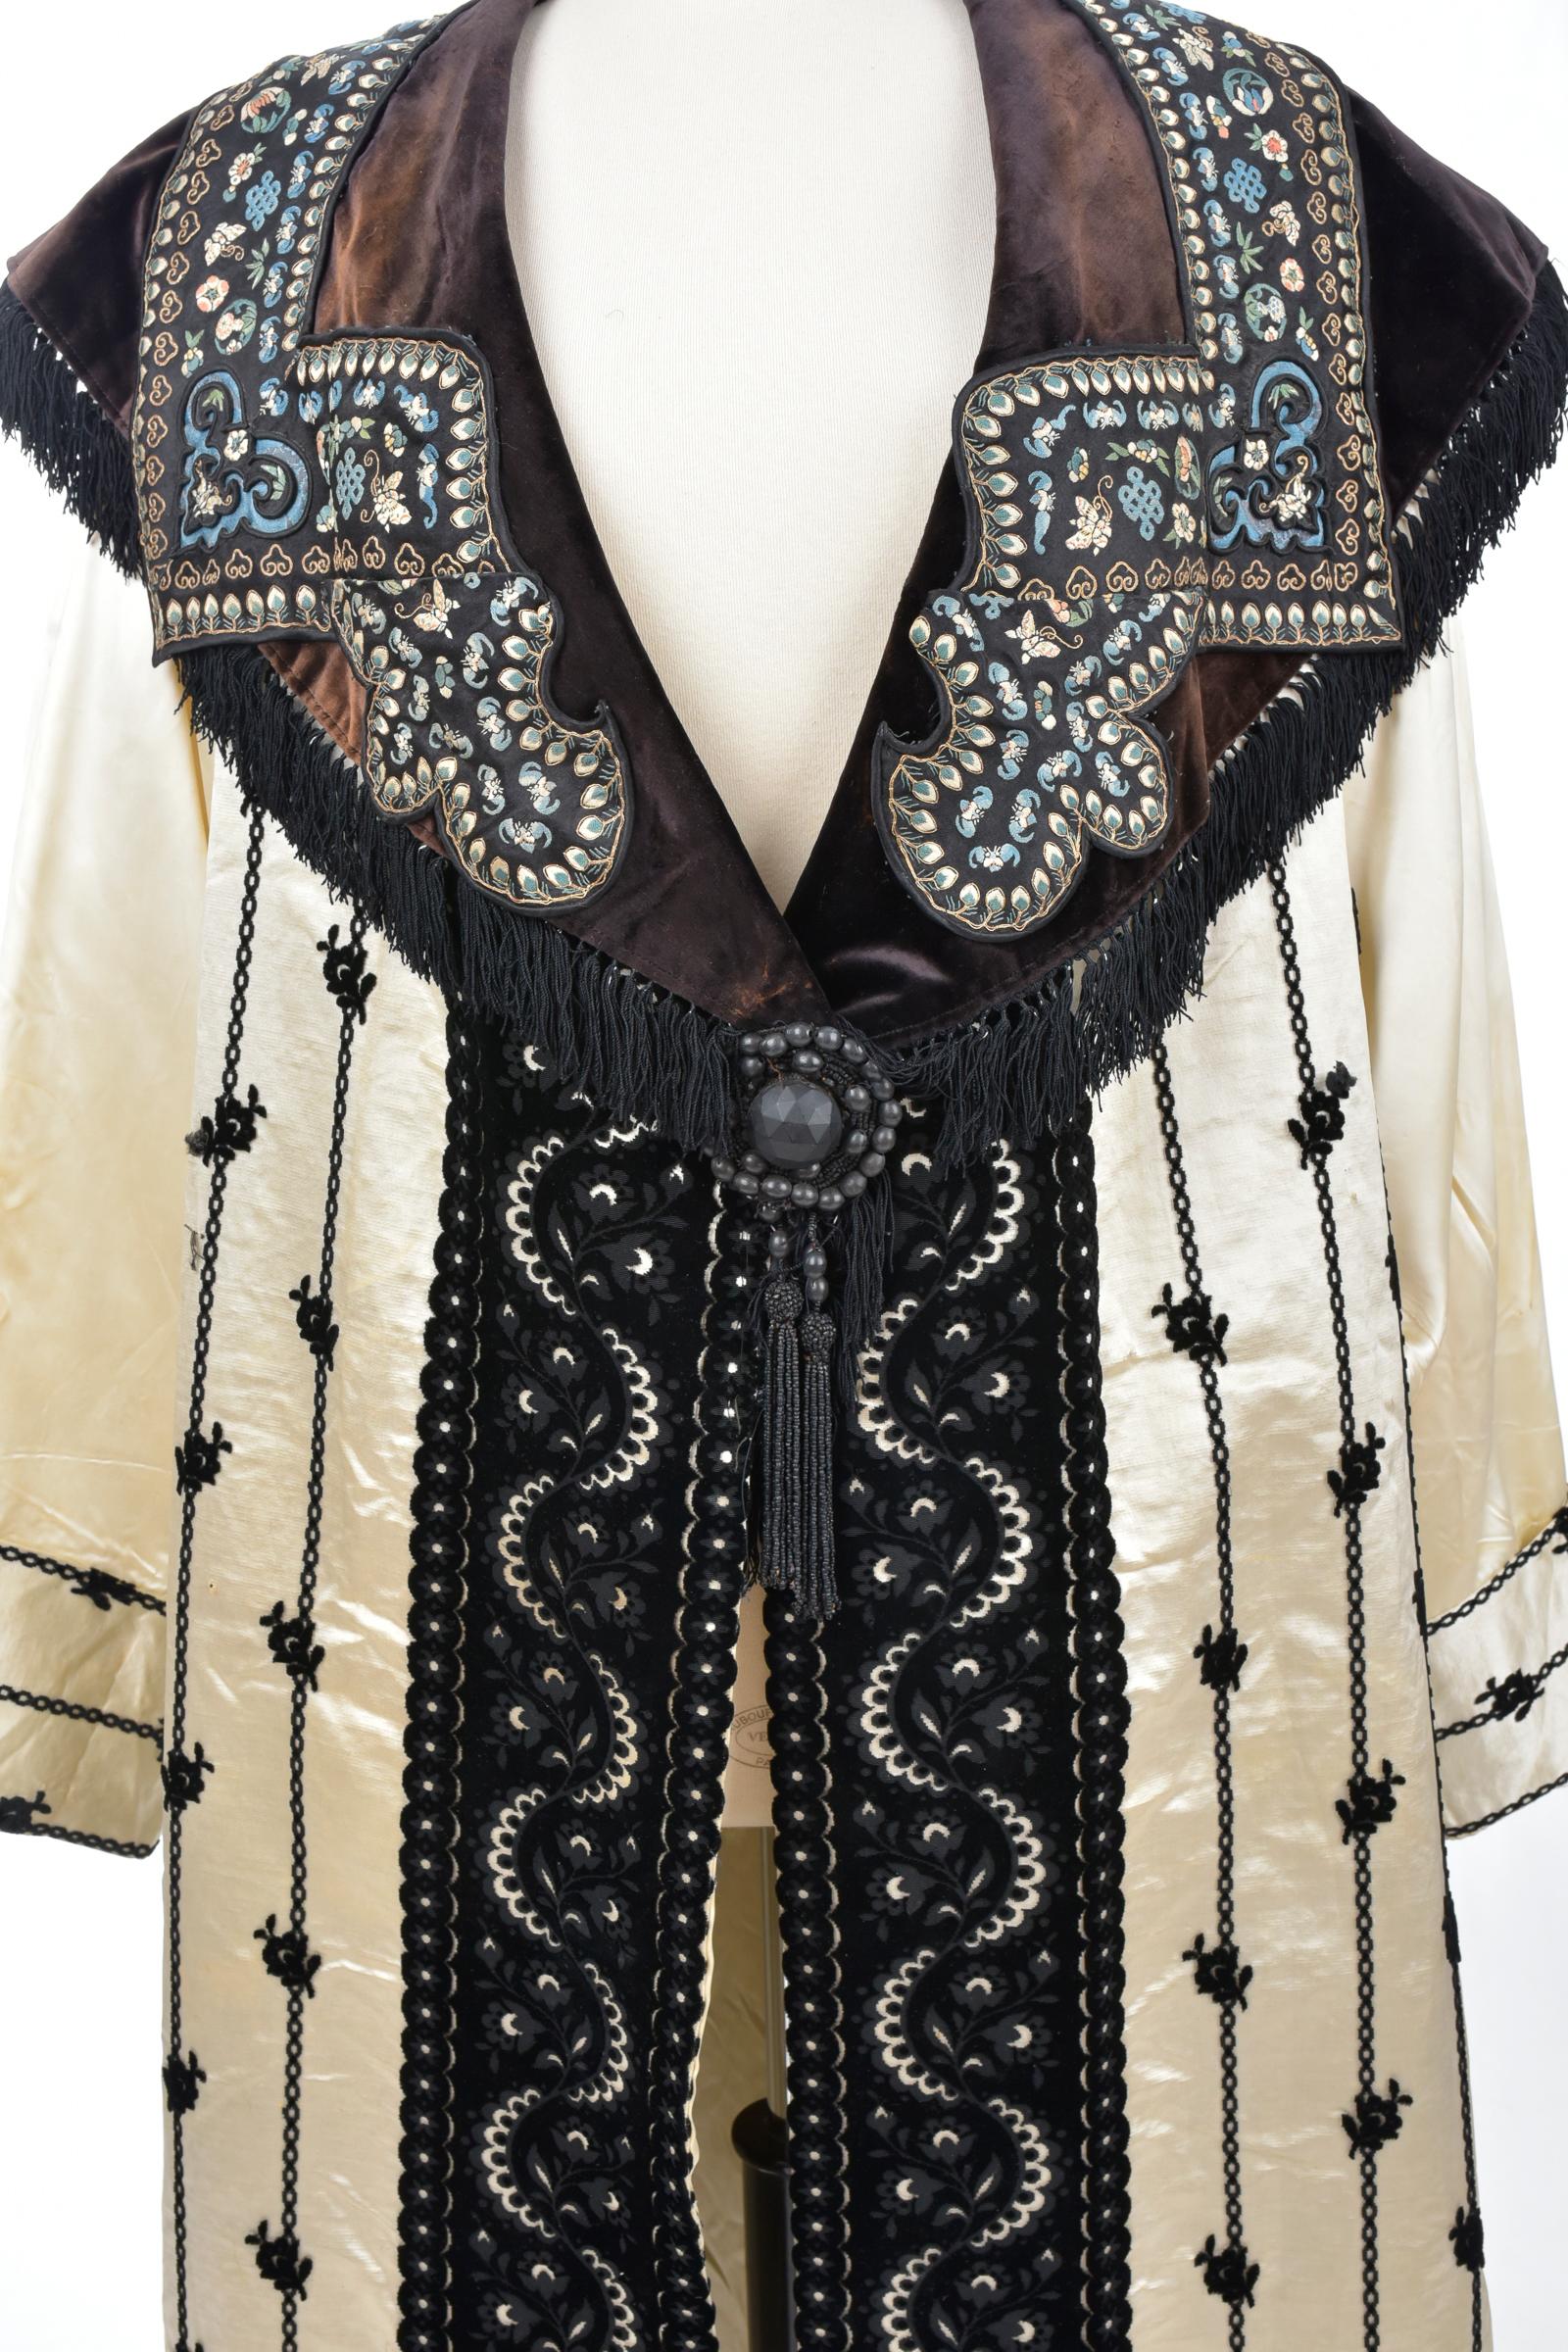 Circa 1915 - 1920
France

Beautiful evening coat in velvet brocaded satin and wide velvet collar applied with Qing embroidery on satin dating from the Orientalist period of the Ballets Russes around 1915. Large brown velvet collar applied Chinese